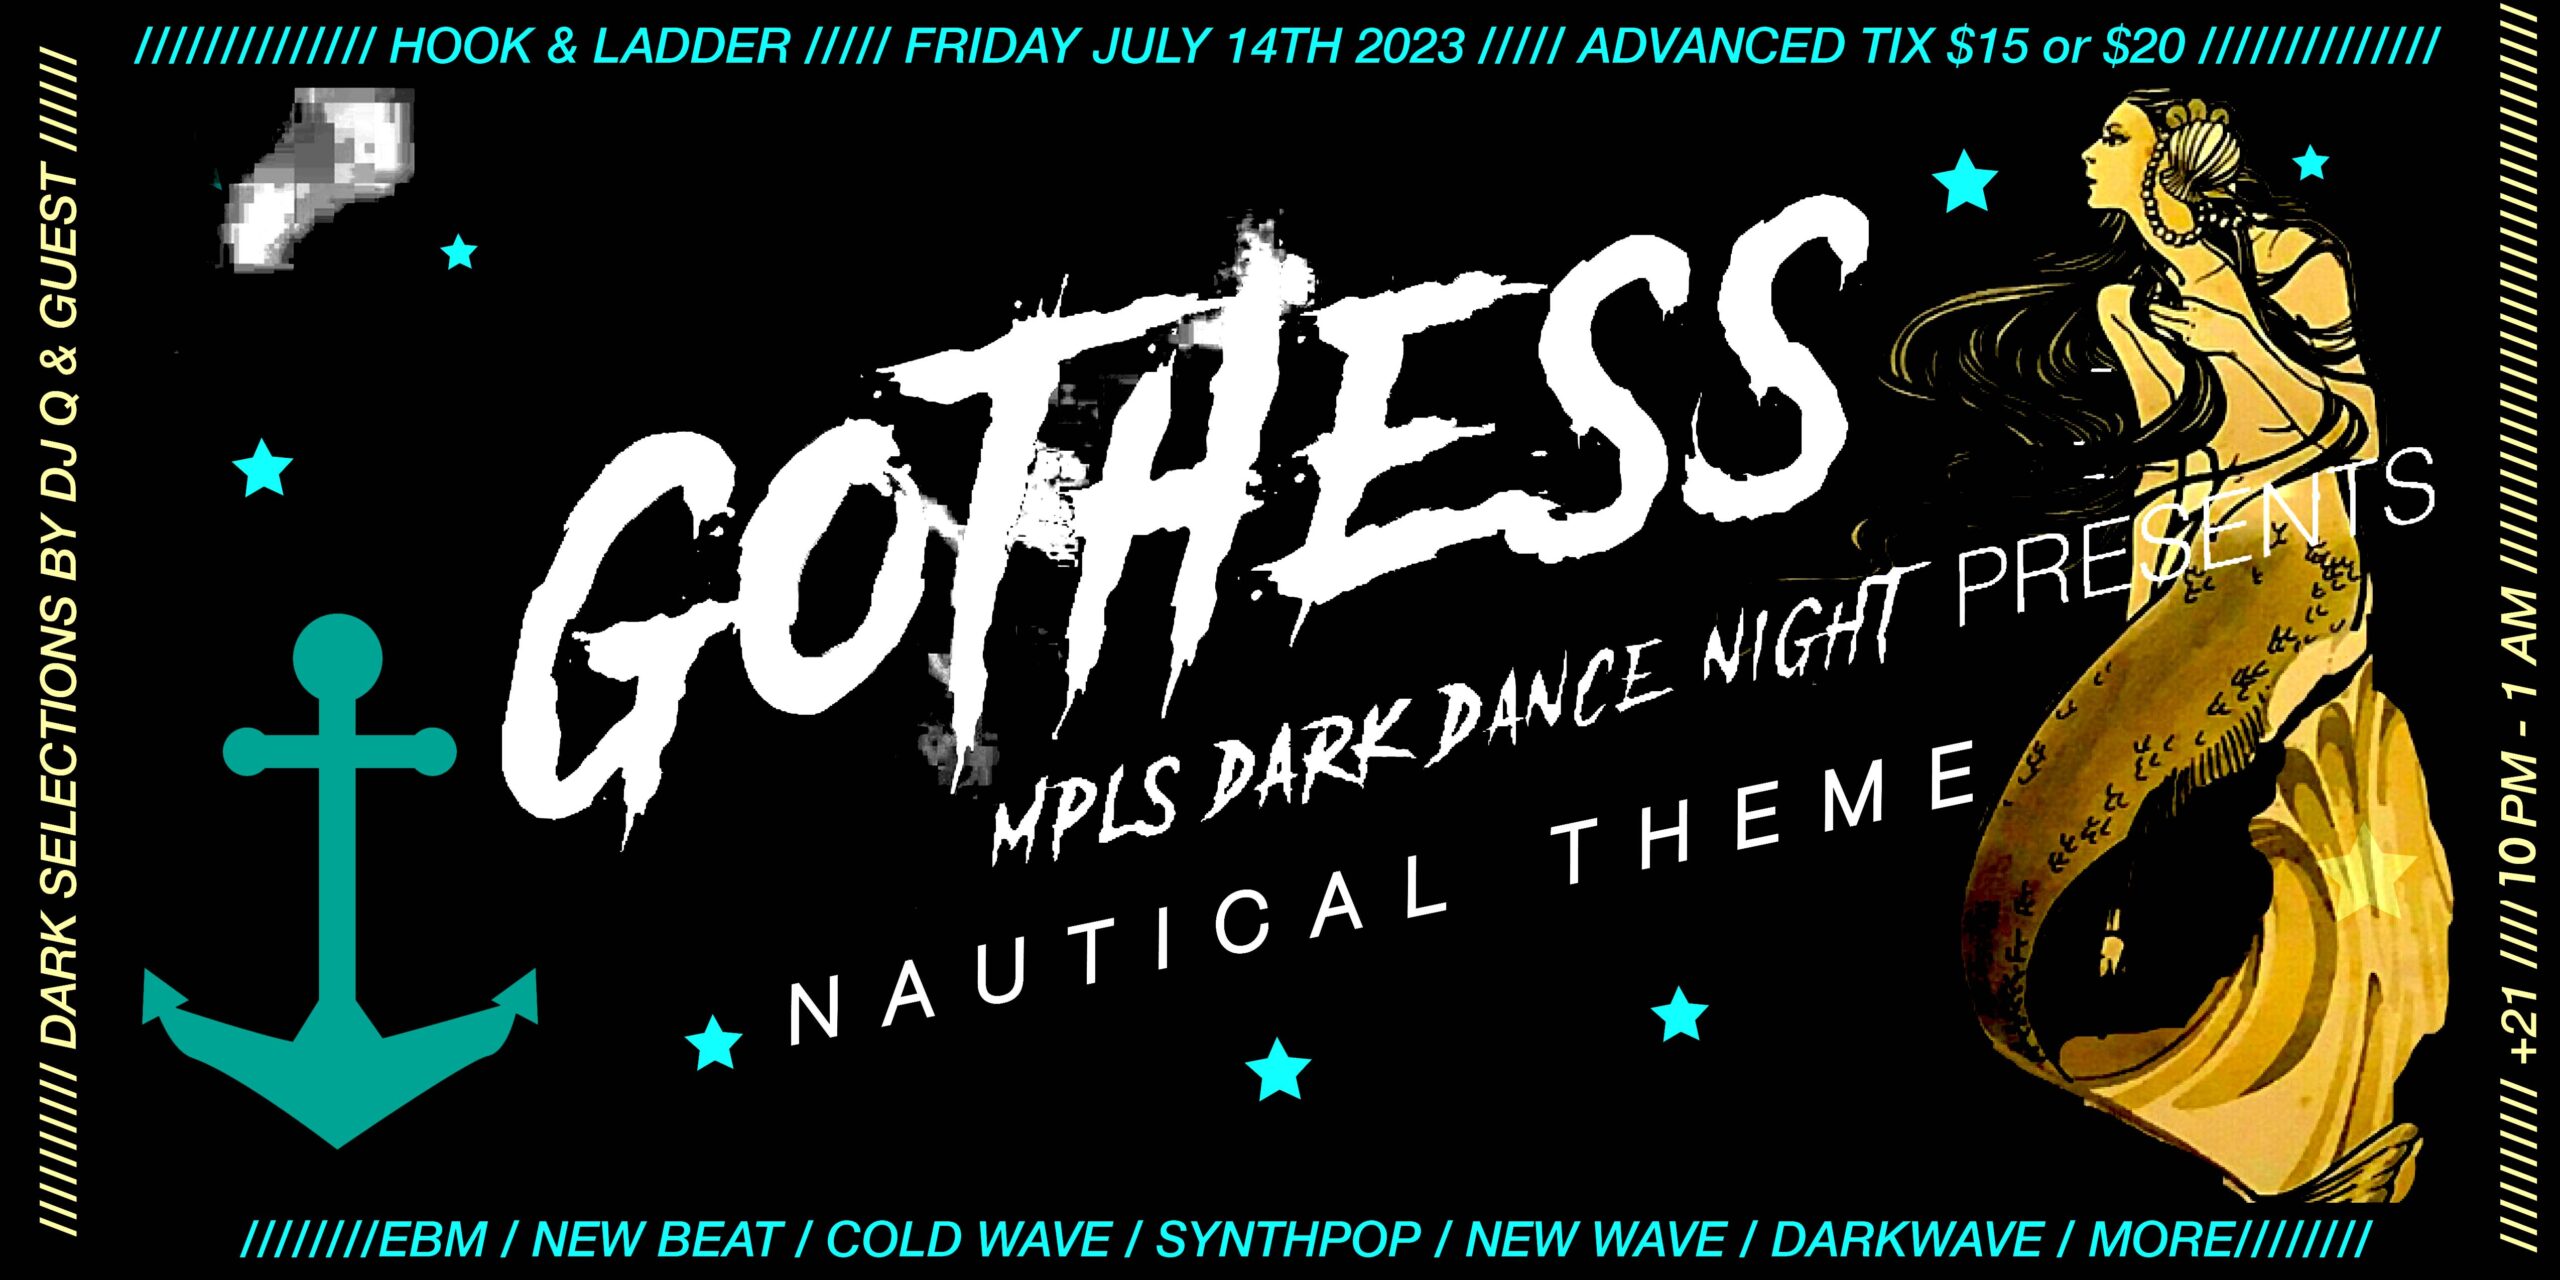 +Gothess+ Nautical Goth Theme Friday July 14 The Hook and Ladder Theater Doors 10:00pm :: Music 10:00pm :: 21+ General Admission * $15 ADV / $20 DOS * Does not include fees NO REFUNDS Tickets On-Sale Now